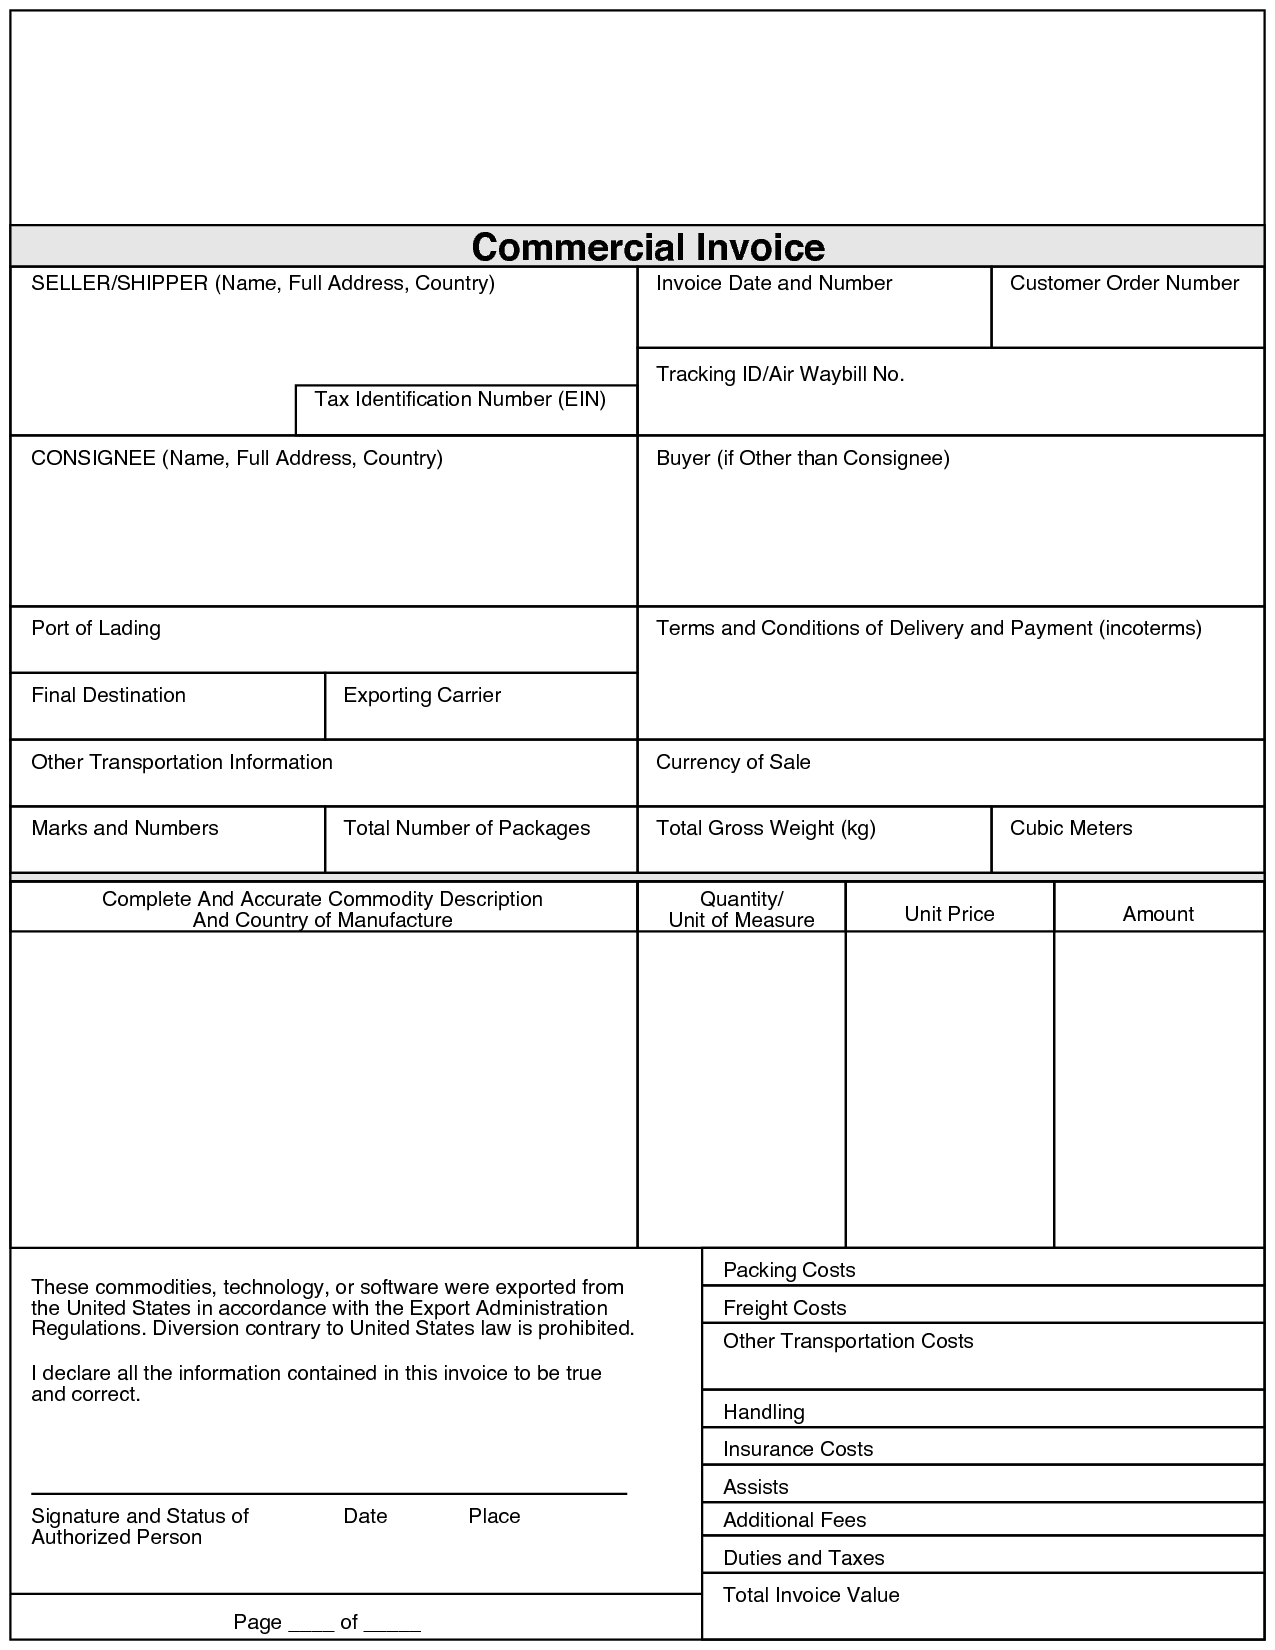 Commercial Invoice Template Fedex db excel com